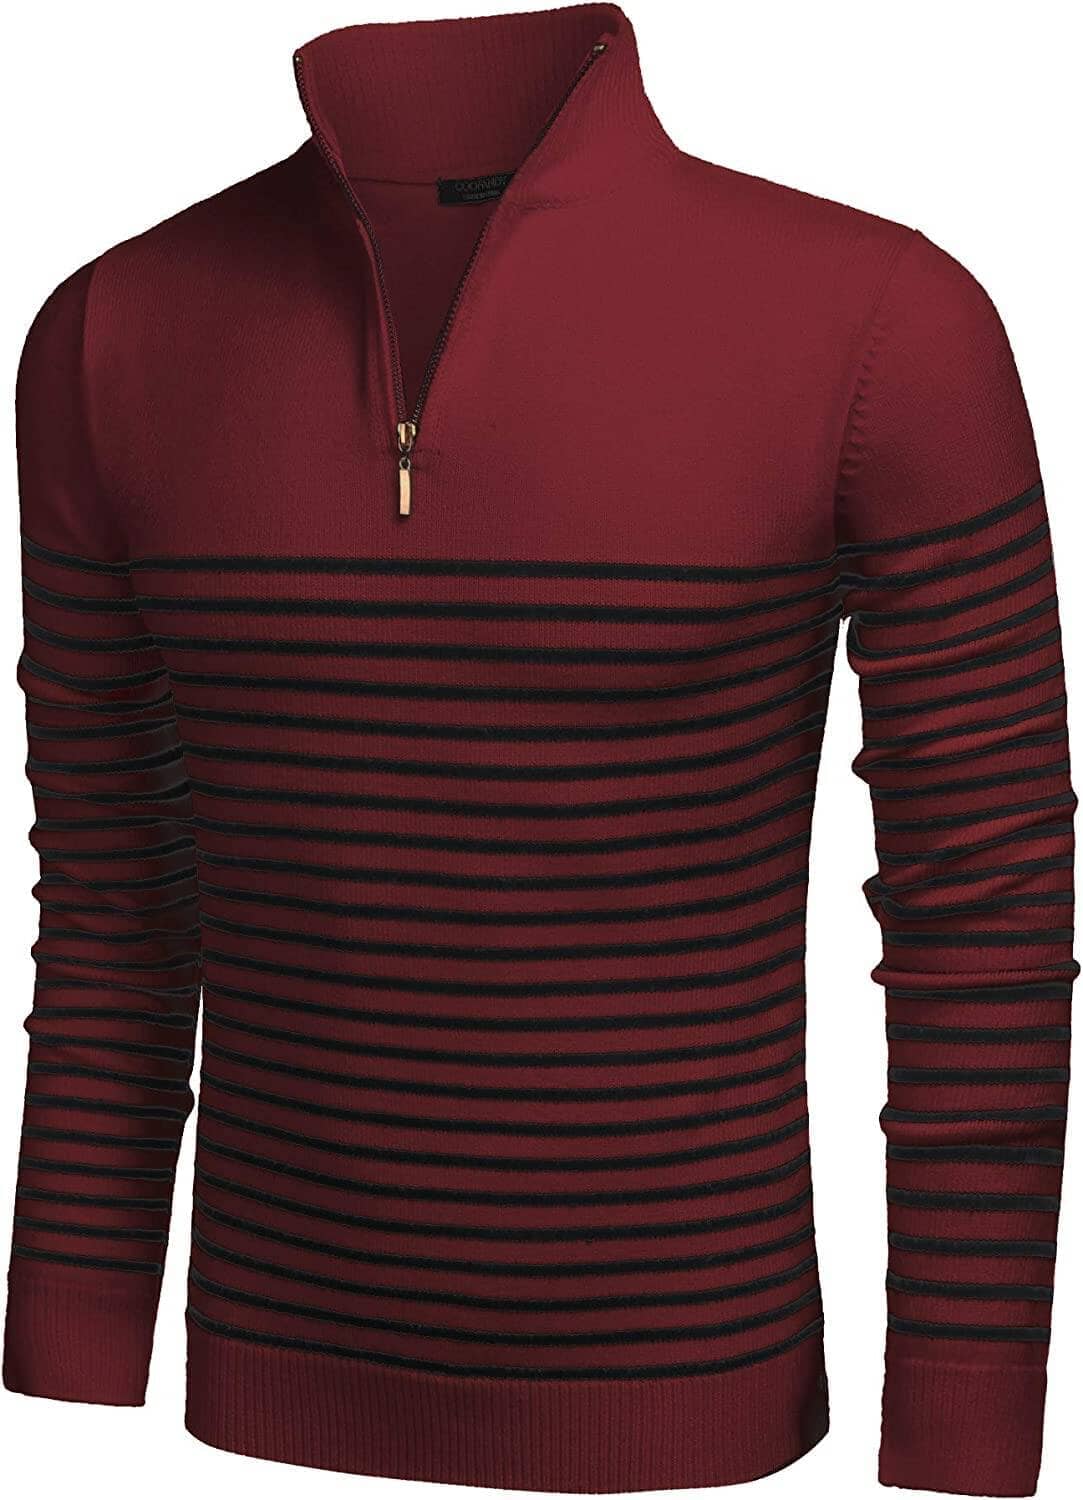 Striped Zip Up Mock Neck Pullover Sweaters (US Only) Sweaters COOFANDY Store Red S 